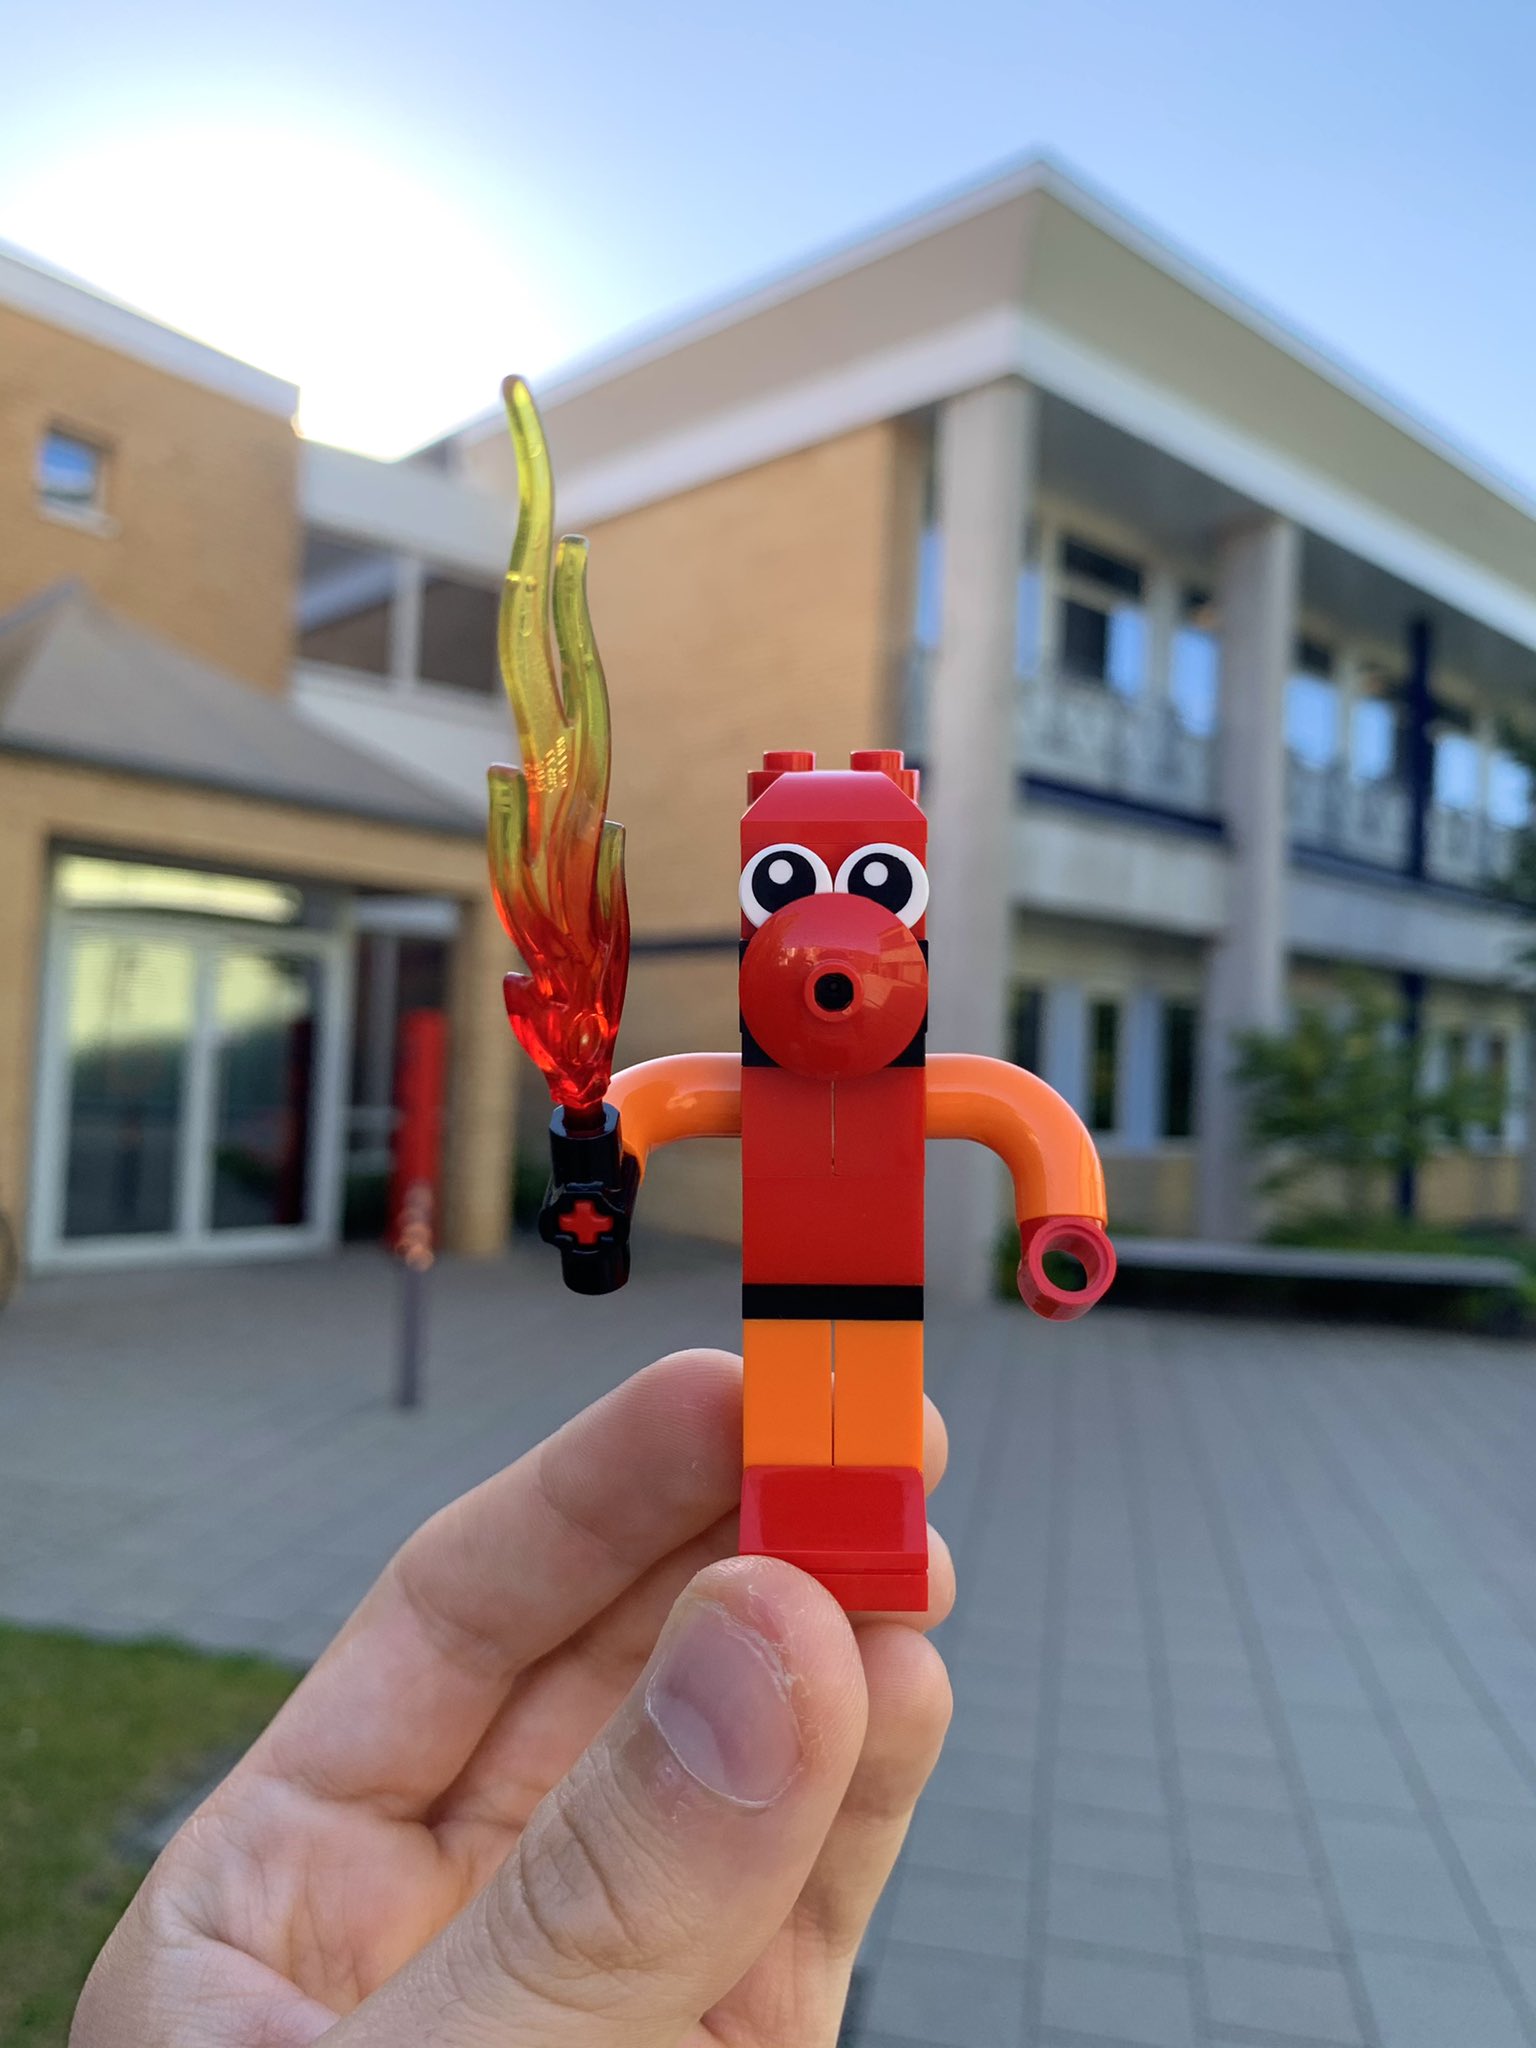 George Gilliatt on "To BIONICLE Day, Classic Tahu went and visited LEGO Tech House - the building the original BIONICLE sets were designed in over 20 years ago! ⭐️ #LEGO #